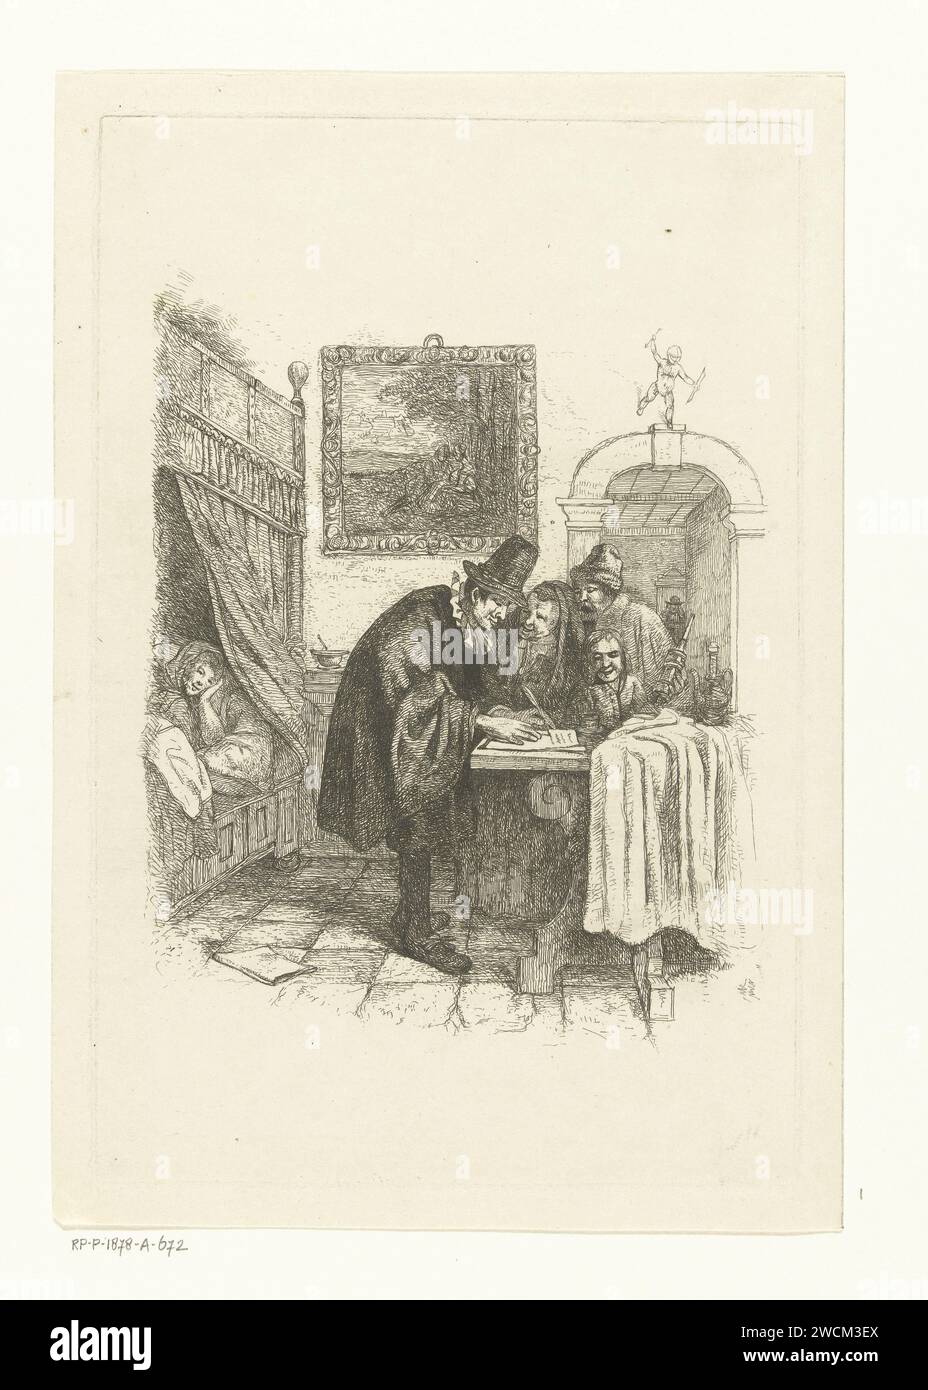 Doctor on a home visit to sick wife, Albertus Brondgeest, After Jan Havicksz. Steen, 1796 - 1849 print A doctor writes a recipe standing at a table. An old woman, a man with a cloud spray and a boy watch. The patient, a sick woman, is in bed. In the interior there is a painting on the wall with a pastoral scene. On top of the bar is a small statue of Amor. Netherlands paper etching sick-bed. physician, doctor Stock Photo